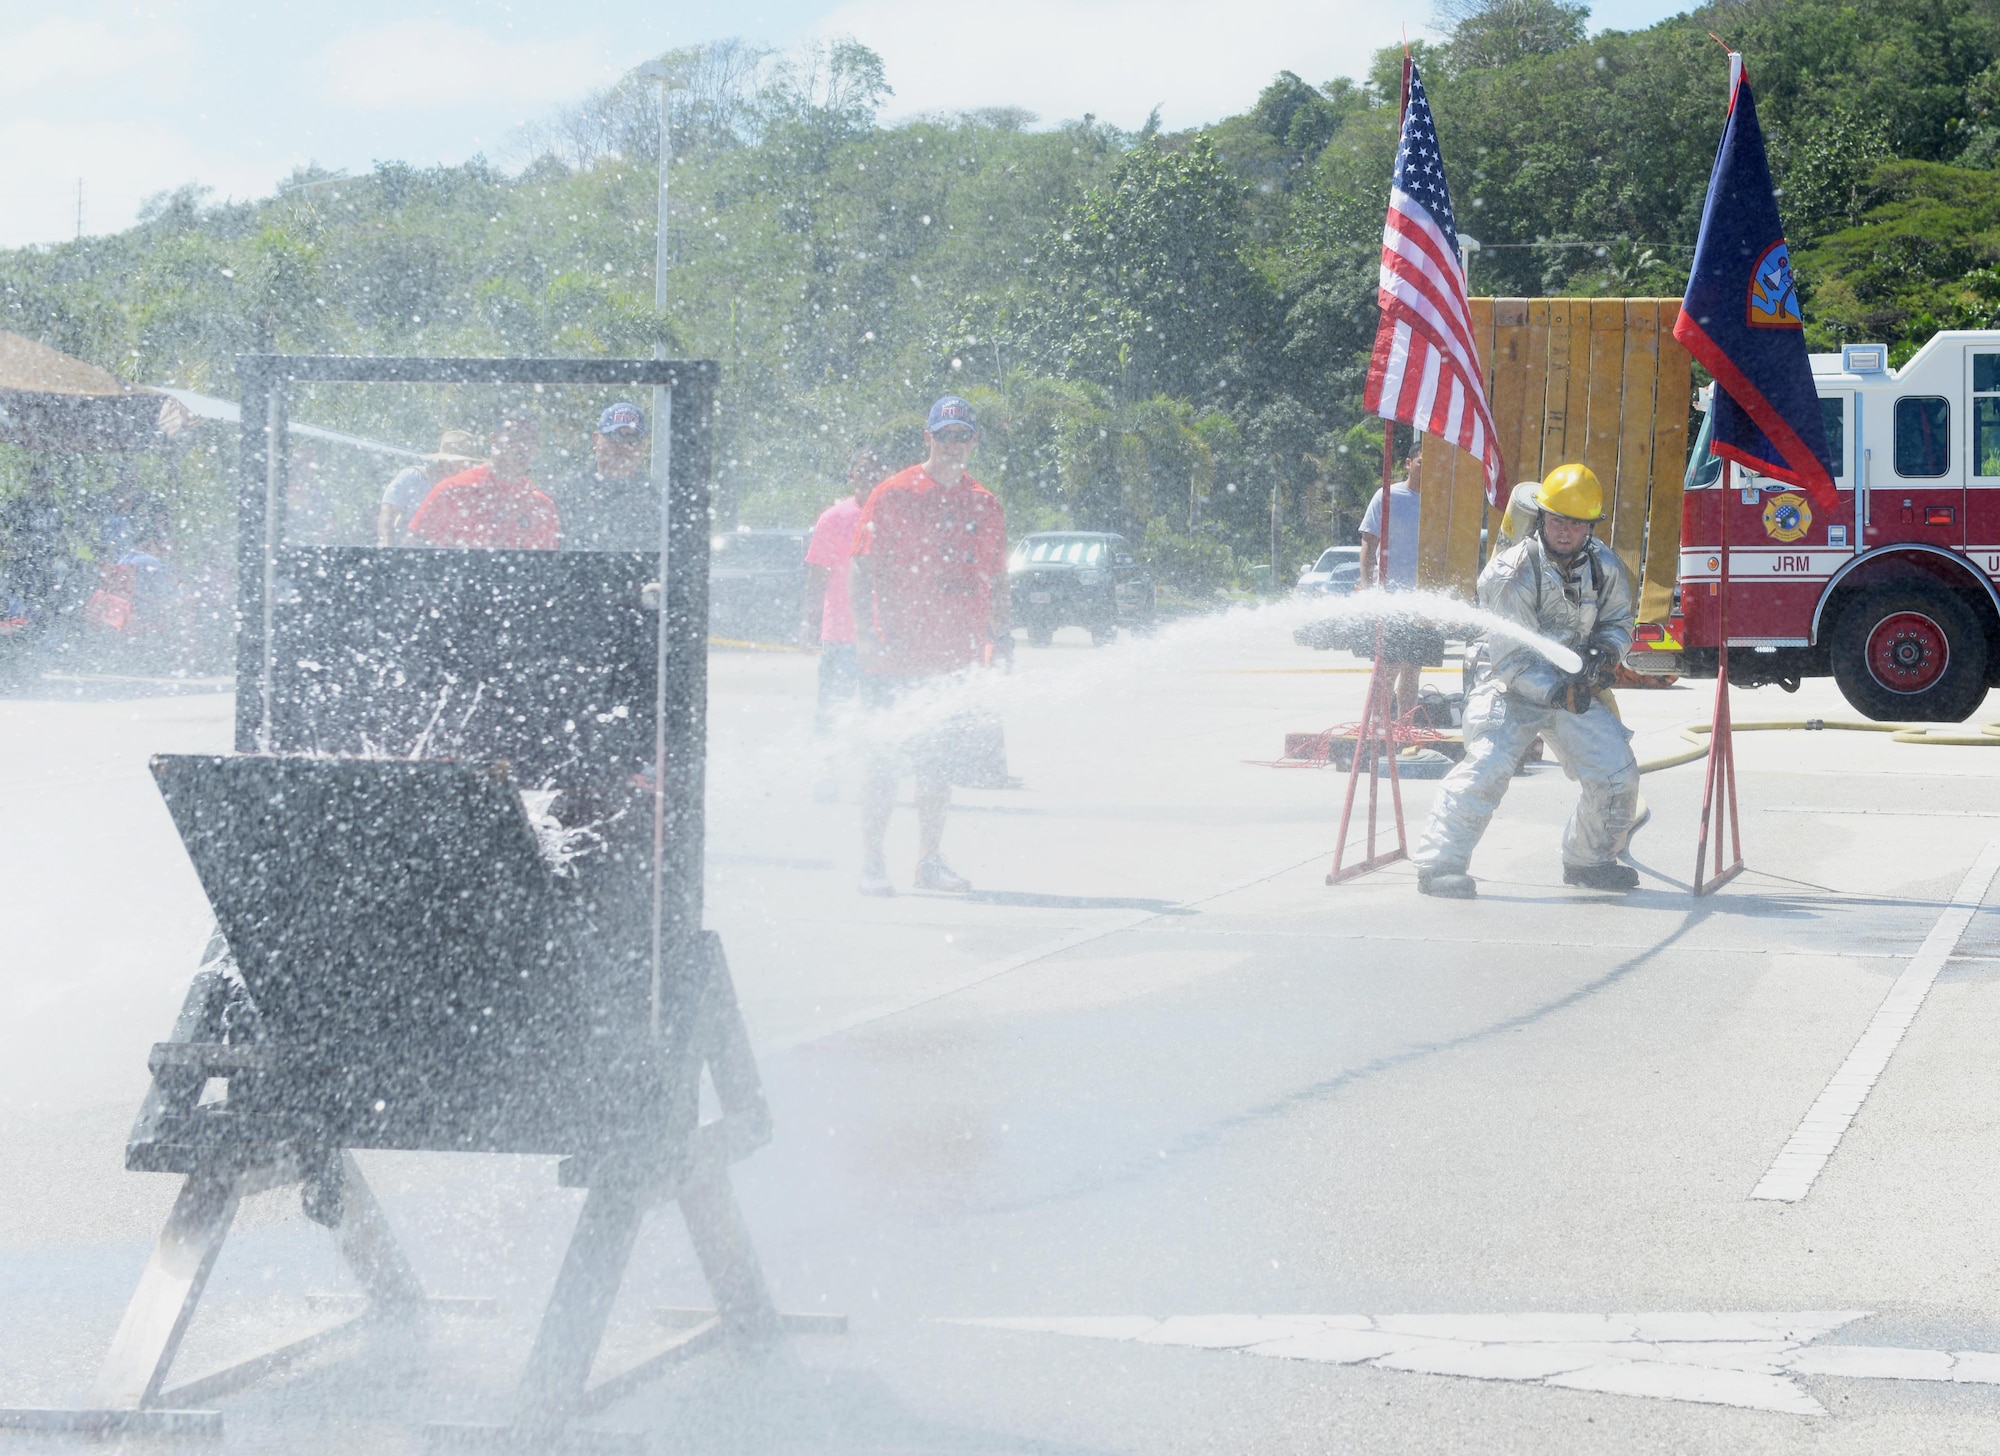 Airman 1st Class Zach Hamlette, 36th Civil Engineer Squadron fire protection crew chief, sprays water at a target during the annual Guam Fire Muster competition March 5, 2016, in Hagåtña, Guam. During this obstacle course competition, Hamlette aimed and sprayed water at a target simulating a fire. Once the target was hit, he was able to proceed to the next obstacle. (U.S. Air Force photo/Staff Sgt. Benjamin Gonsier)